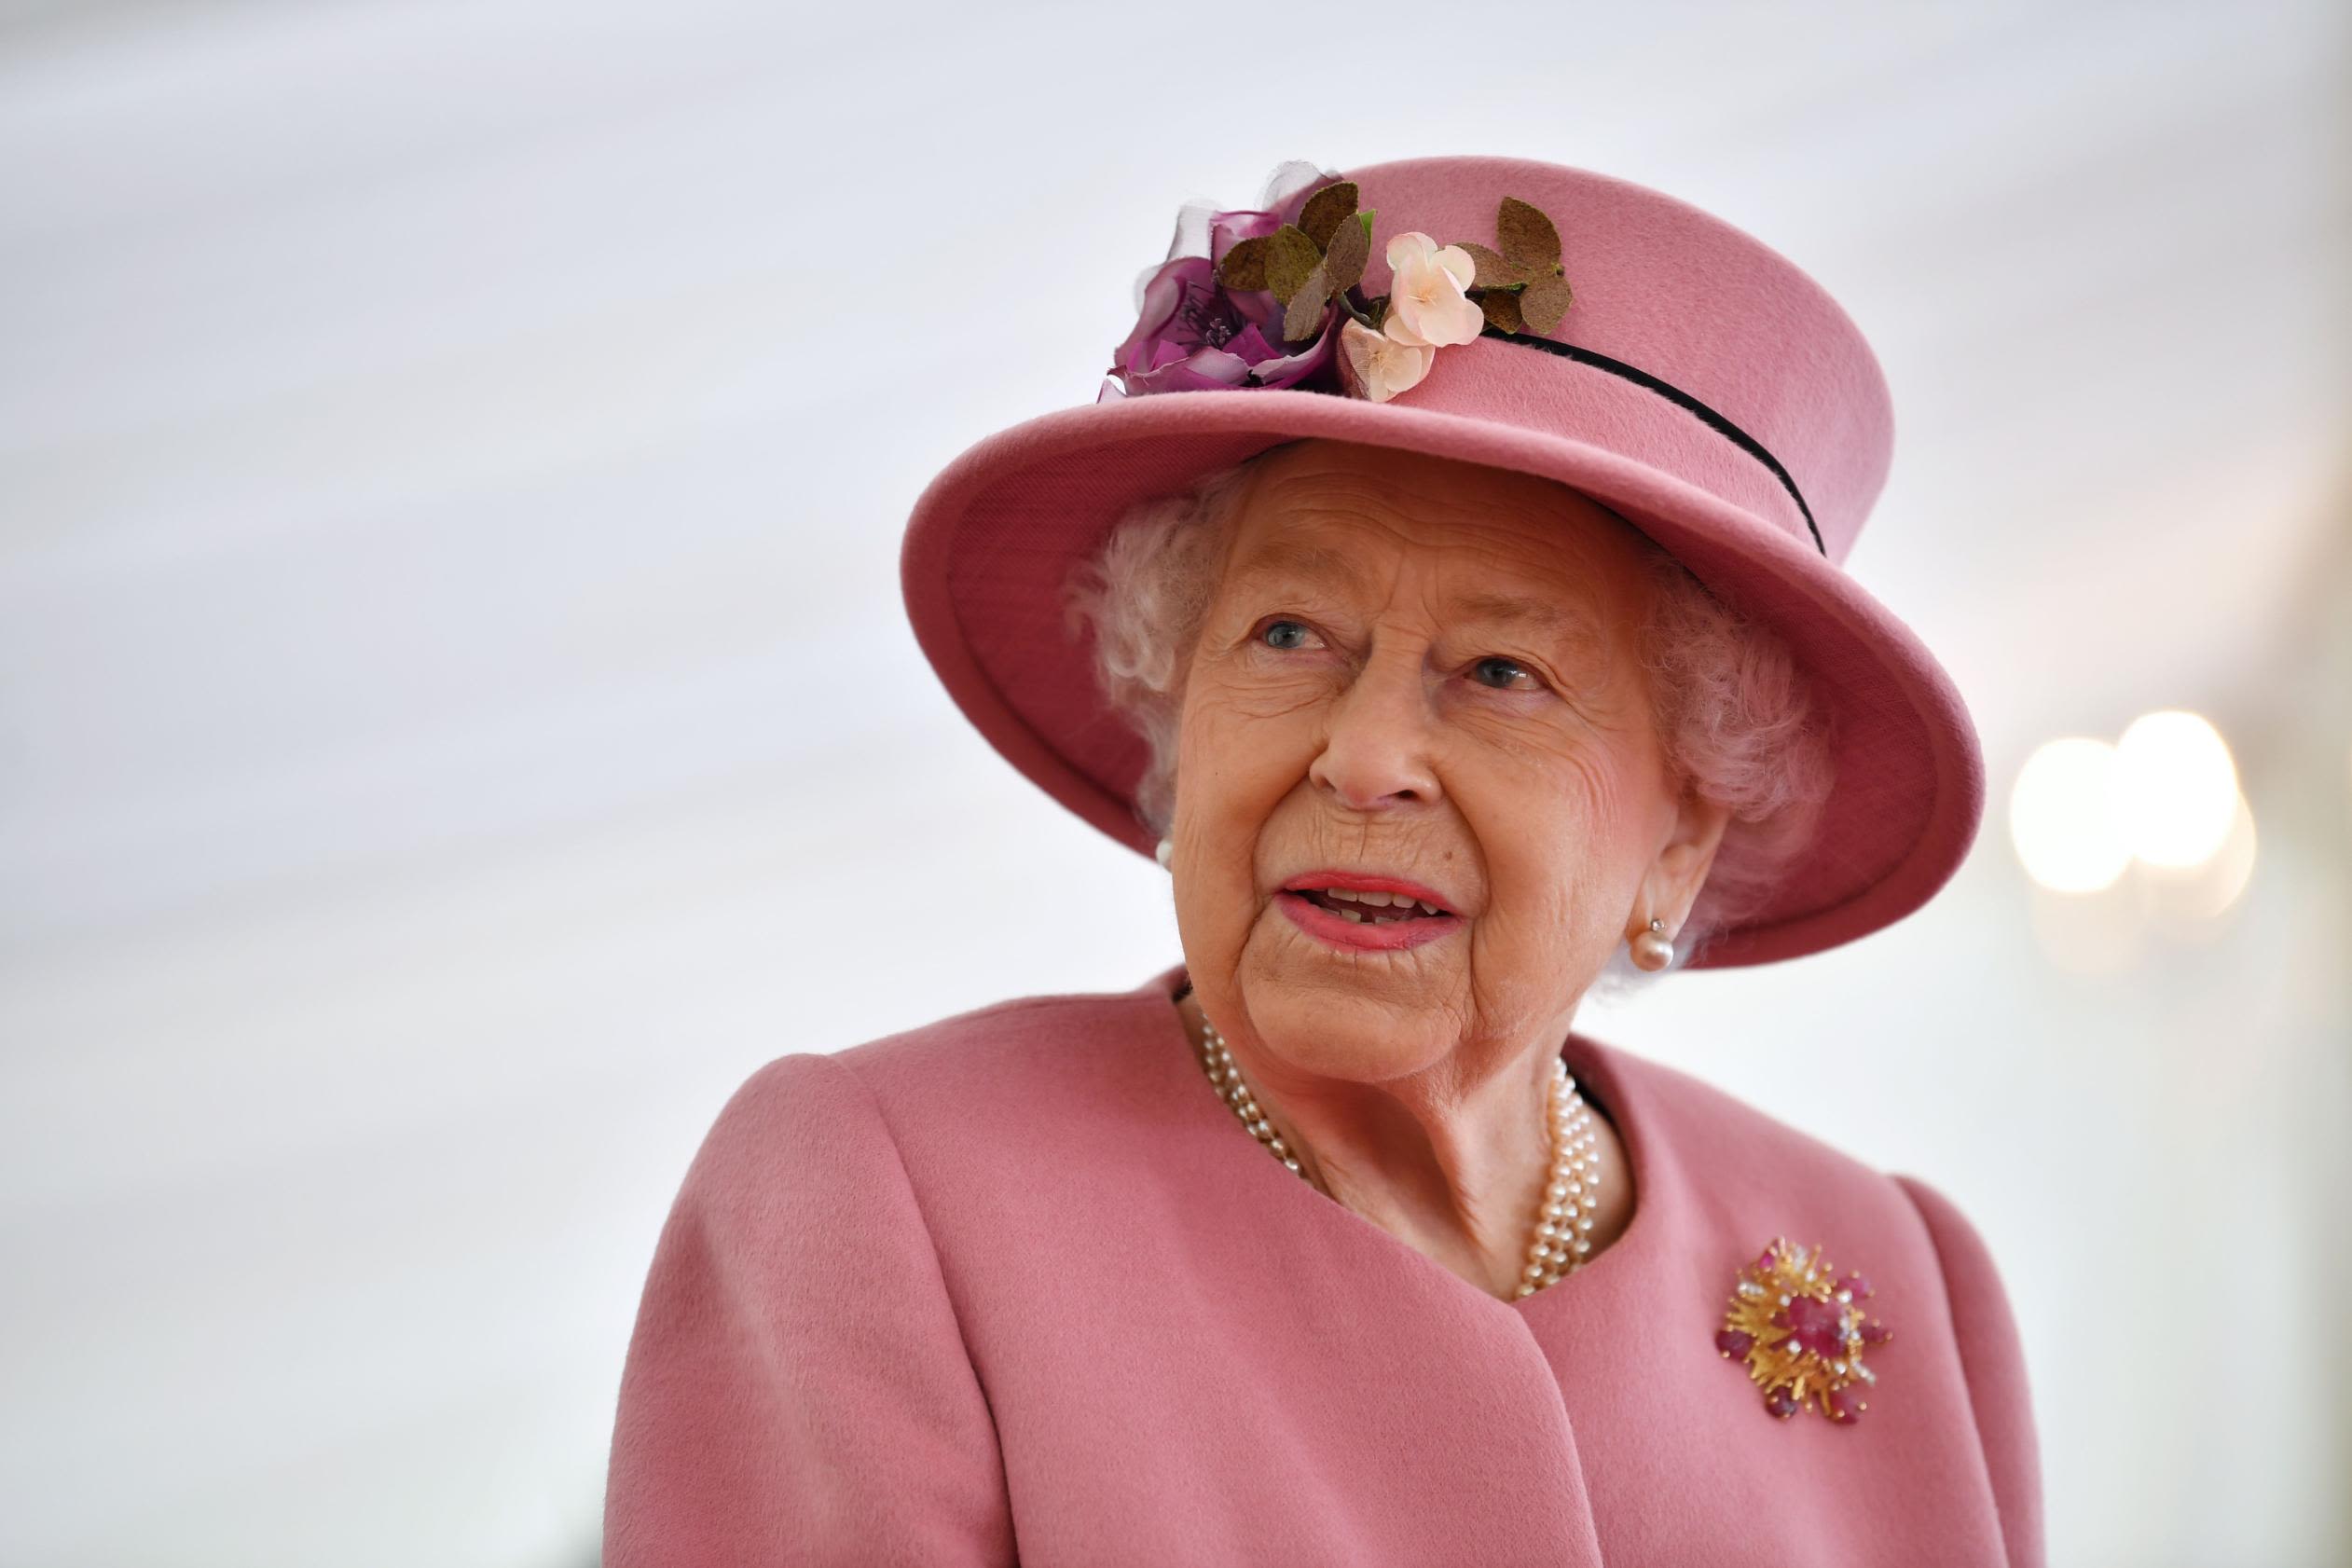 The Queen of England in a pink outfit with pearls and gorgeous hat.